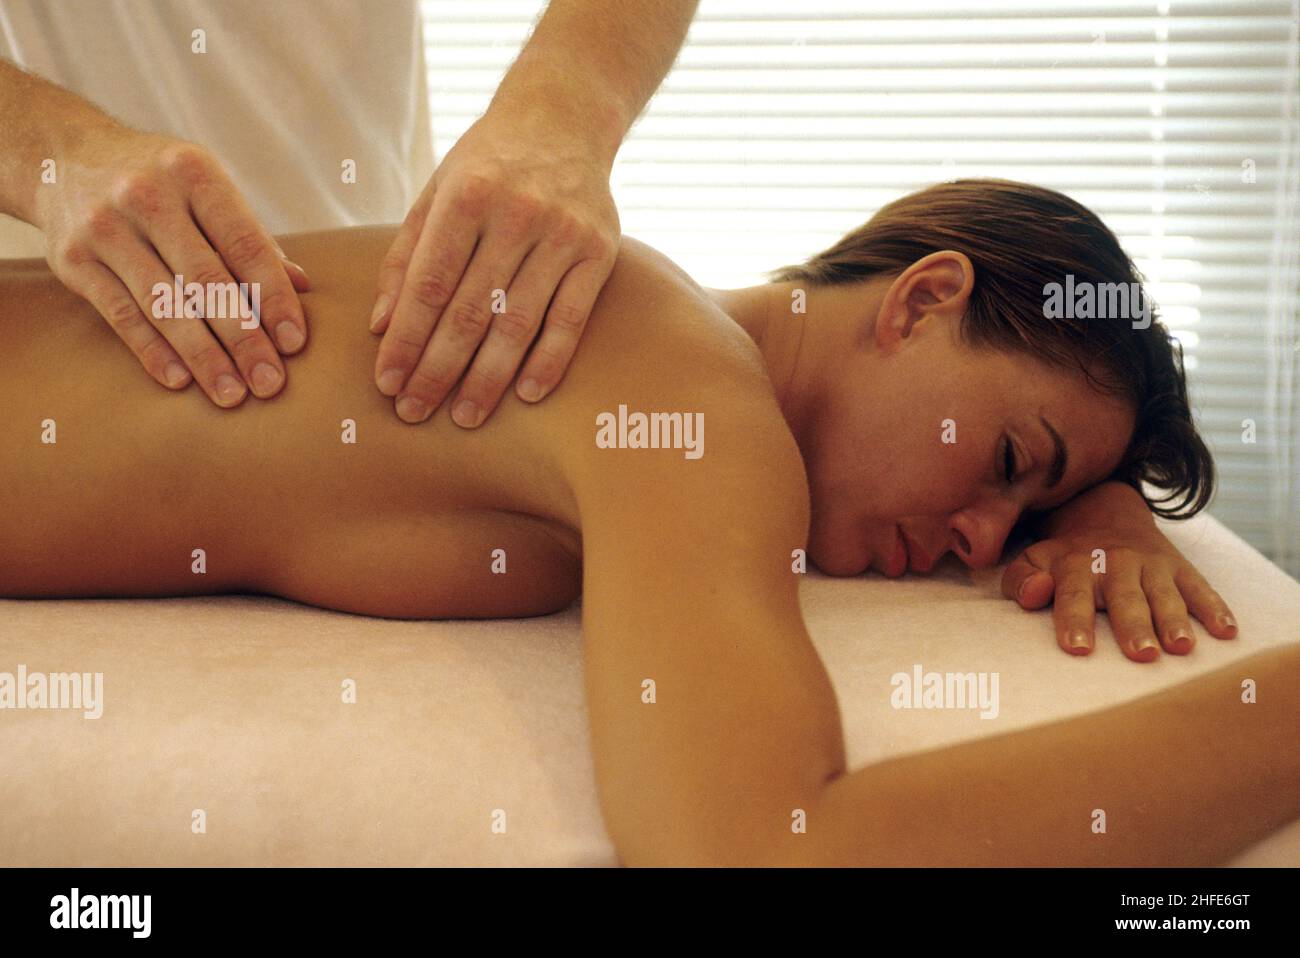 dark hair young girl expressive profile body lay down on a tabble physiotherapist massage her scapula Stock Photo